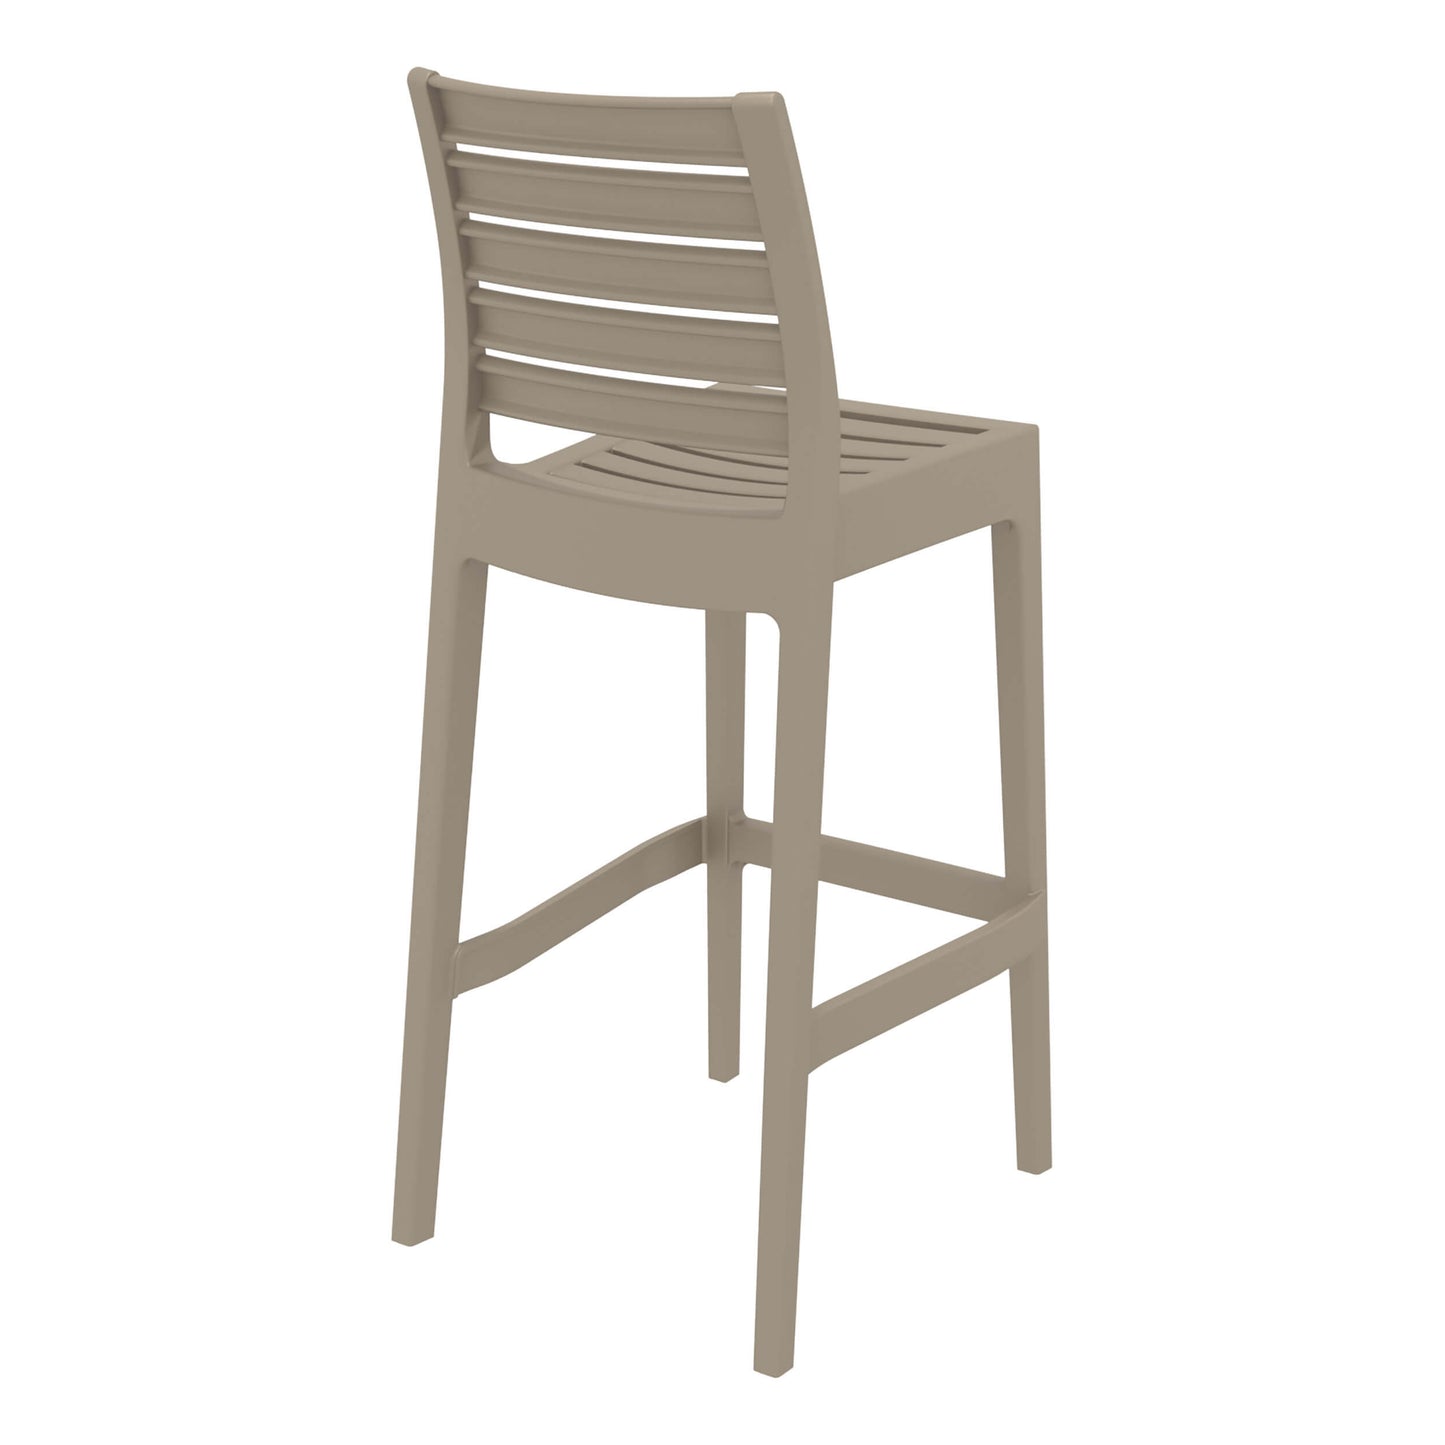 Sunnyhill | Modern Plastic Outdoor Bar Stools | Set Of 4 | Taupe